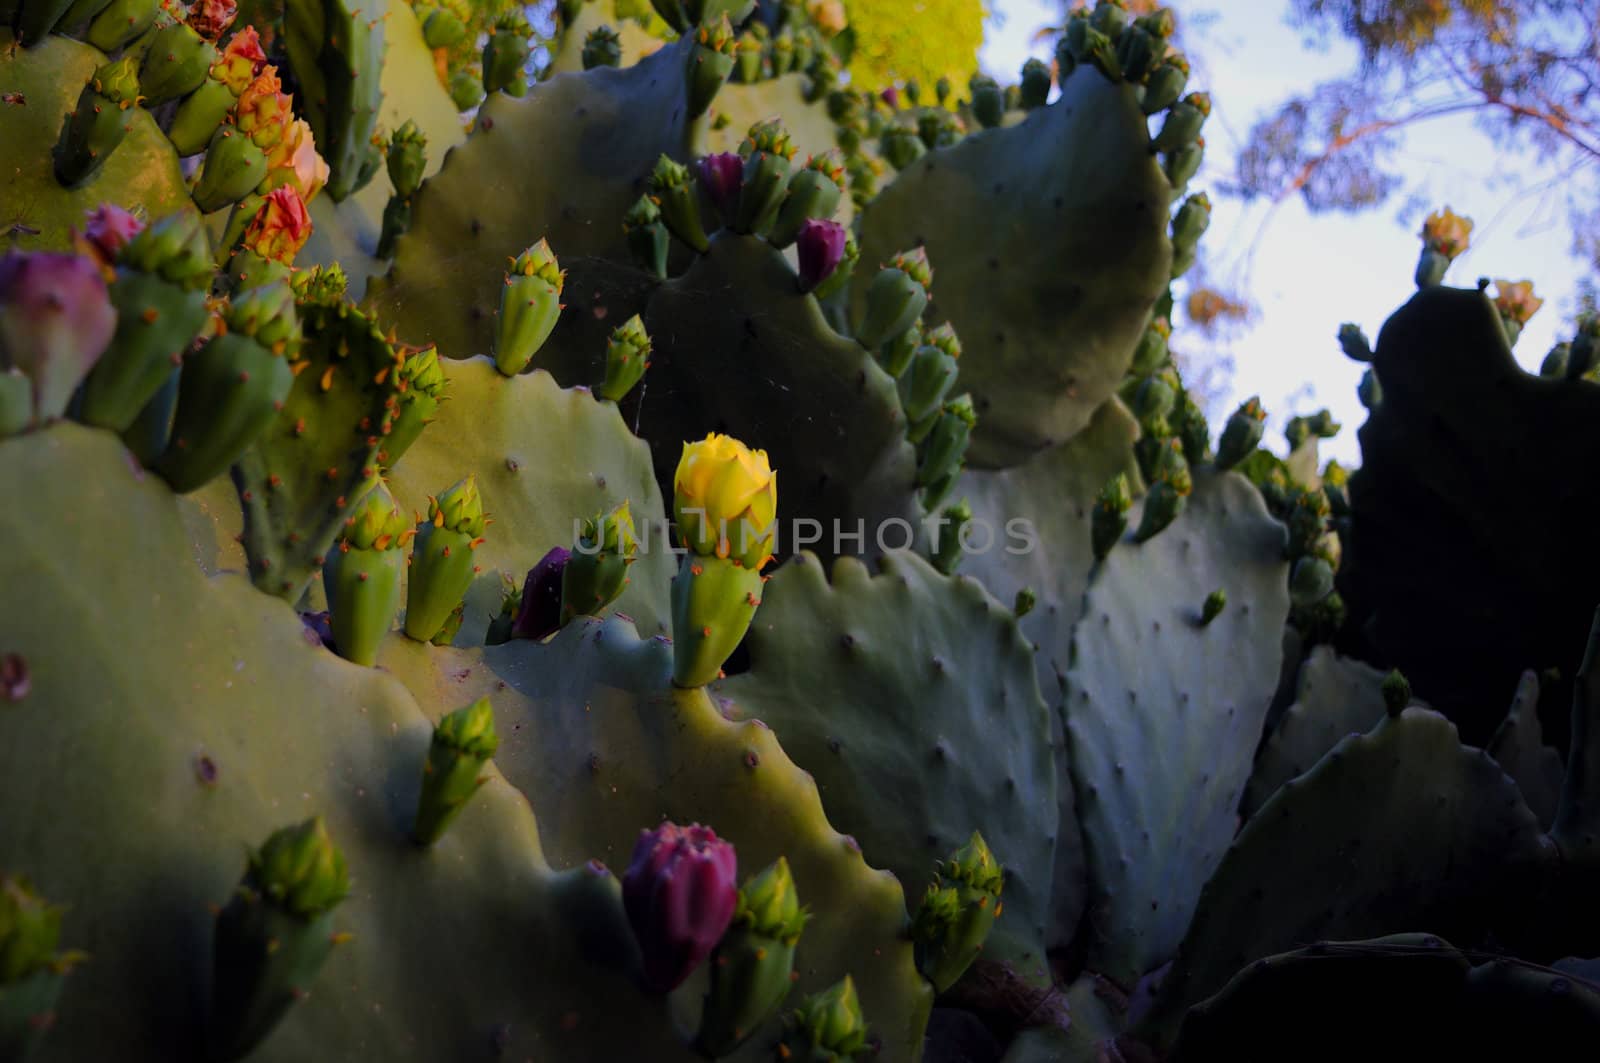 A miniature landscape of prickly pear cactus in bloom.